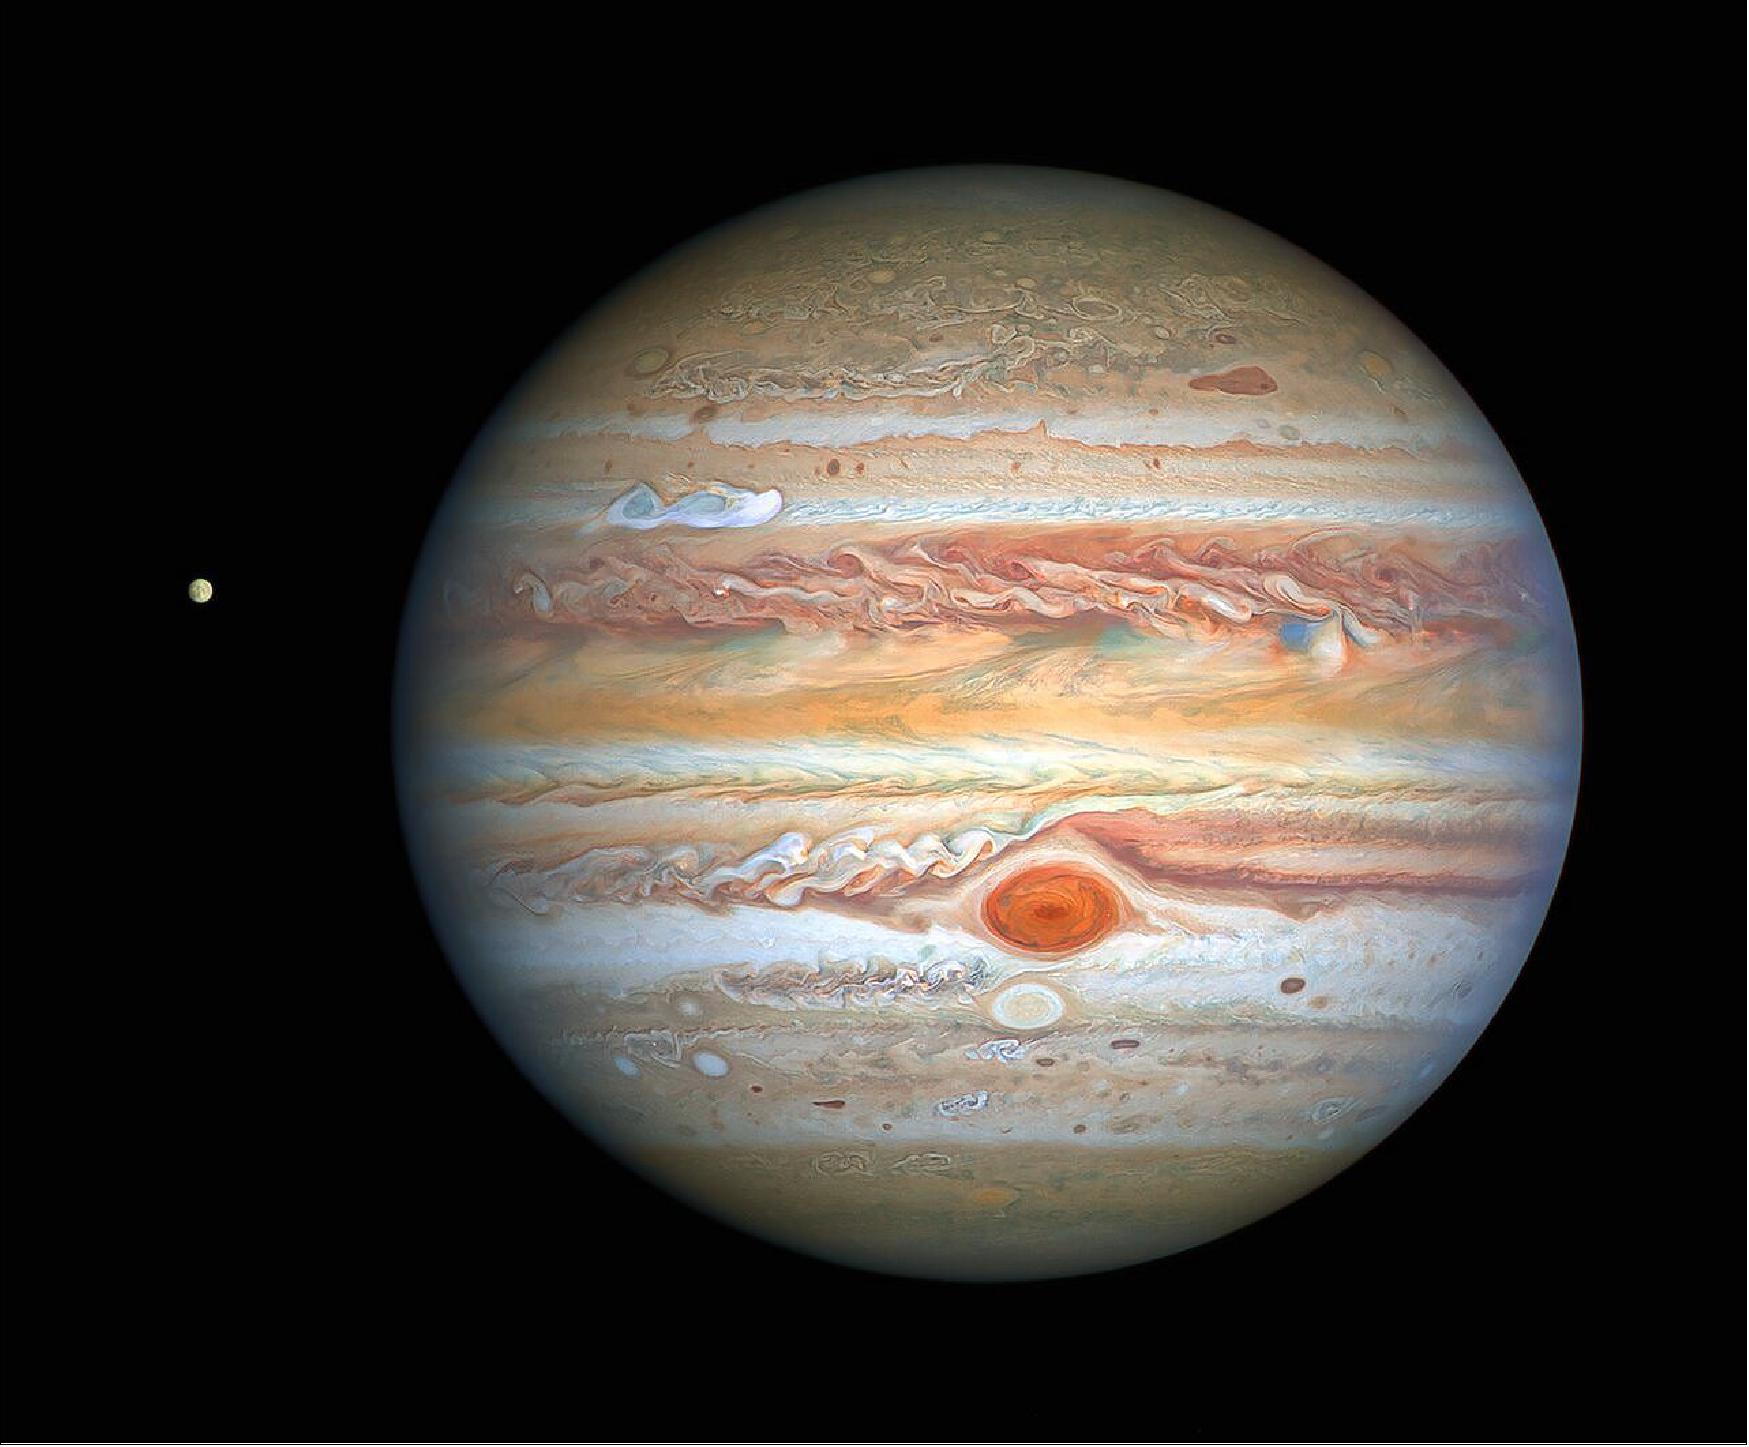 Figure 29: This latest image of Jupiter, taken by the NASA/ESA Hubble Space Telescope on 25 August 2020, was captured when the planet was 653 million km from Earth. Hubble’s sharp view is giving researchers an updated weather report on the monster planet’s turbulent atmosphere, including a remarkable new storm brewing, and a cousin of the Great Red Spot changing color — again. The new image also features Jupiter’s icy moon Europa (image credit: NASA, ESA, A. Simon (Goddard Space Flight Center), and M. H. Wong (University of California, Berkeley) and the OPAL team; CC BY 4.0)